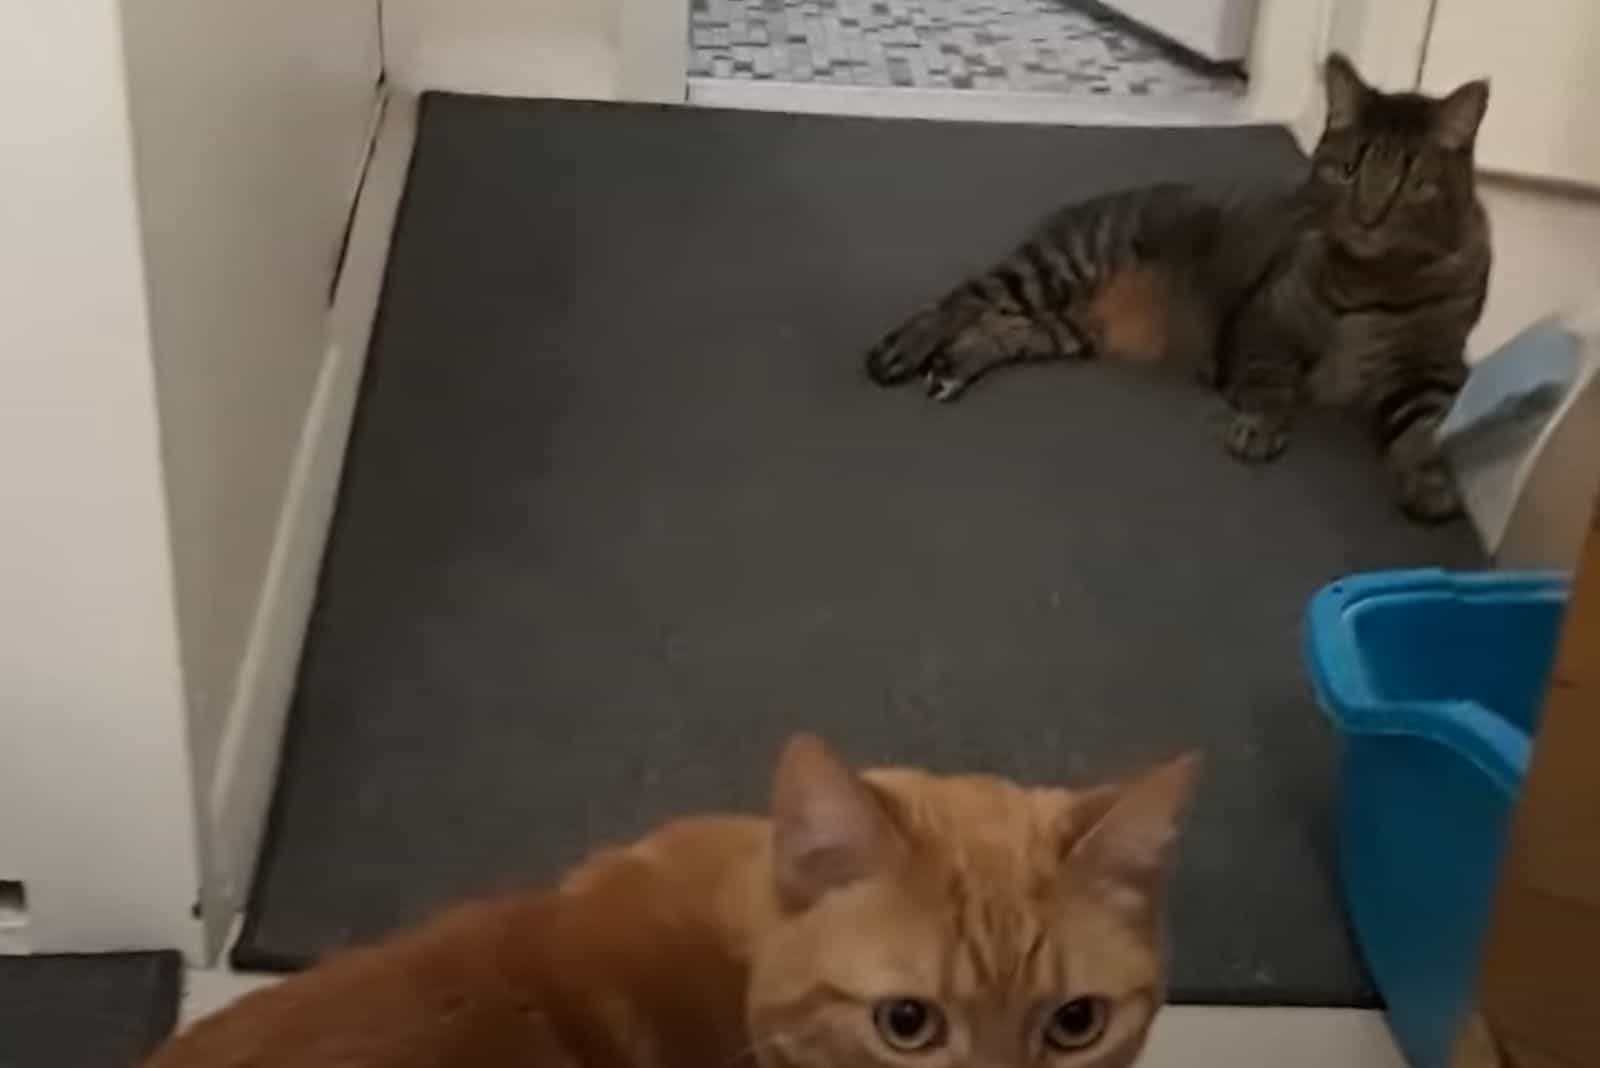 the cat is lying on the floor while the other is looking at the camera